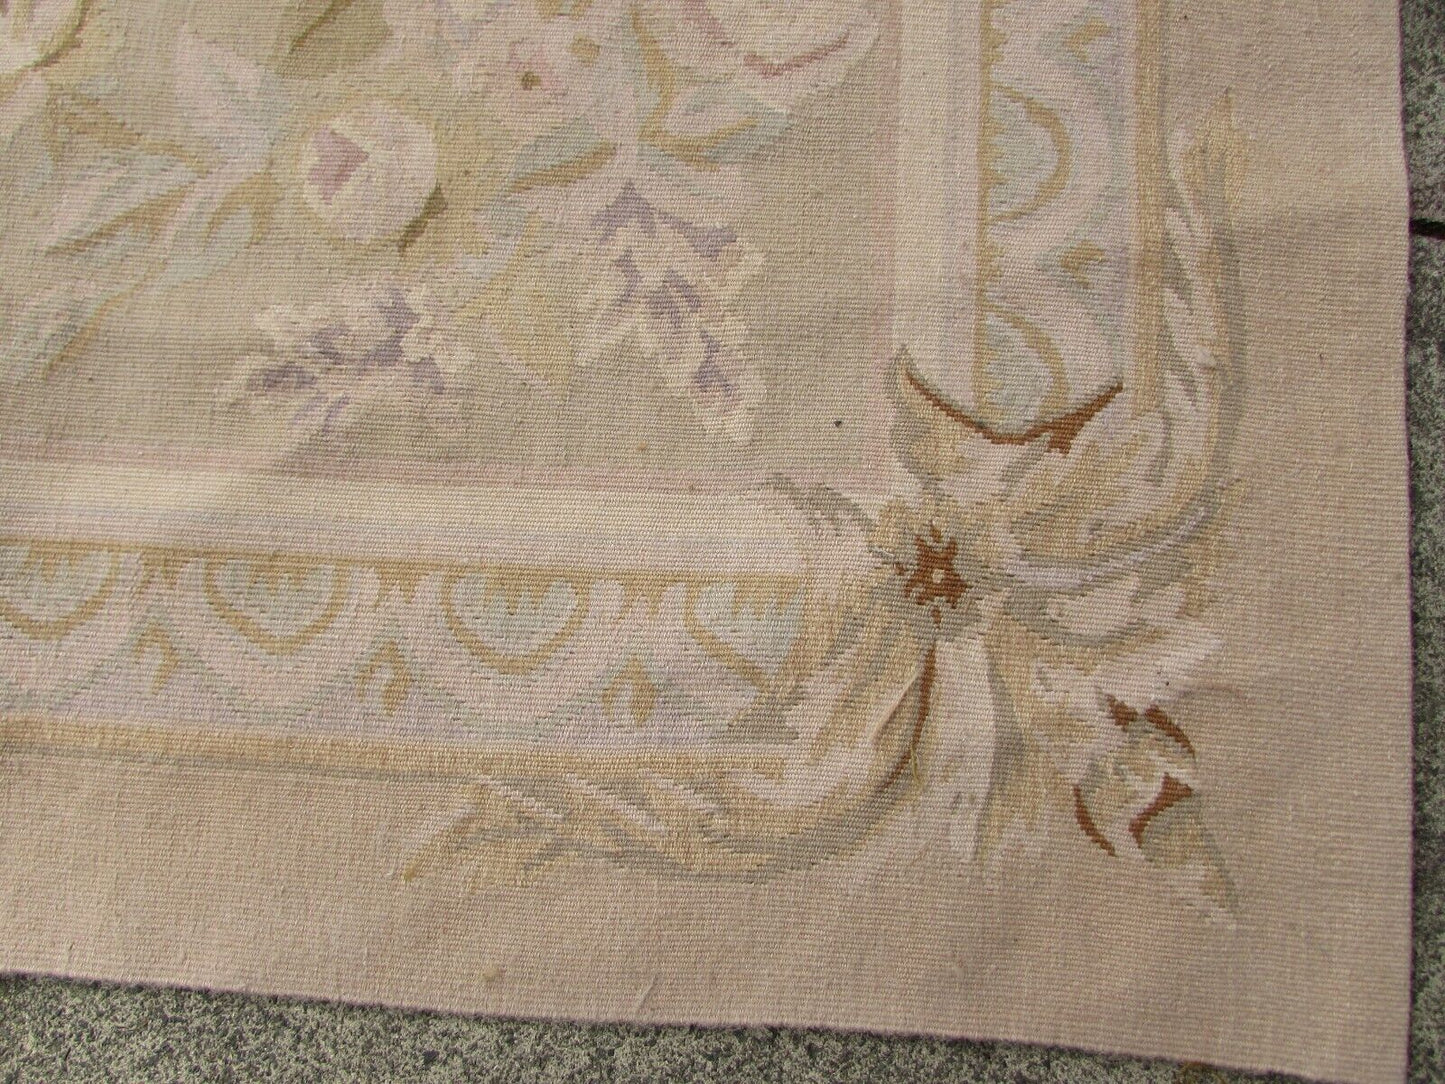 Handmade vintage French Aubusson rug in traditional design and pastel shades. The rug is from the end of 20th century in original good condition.